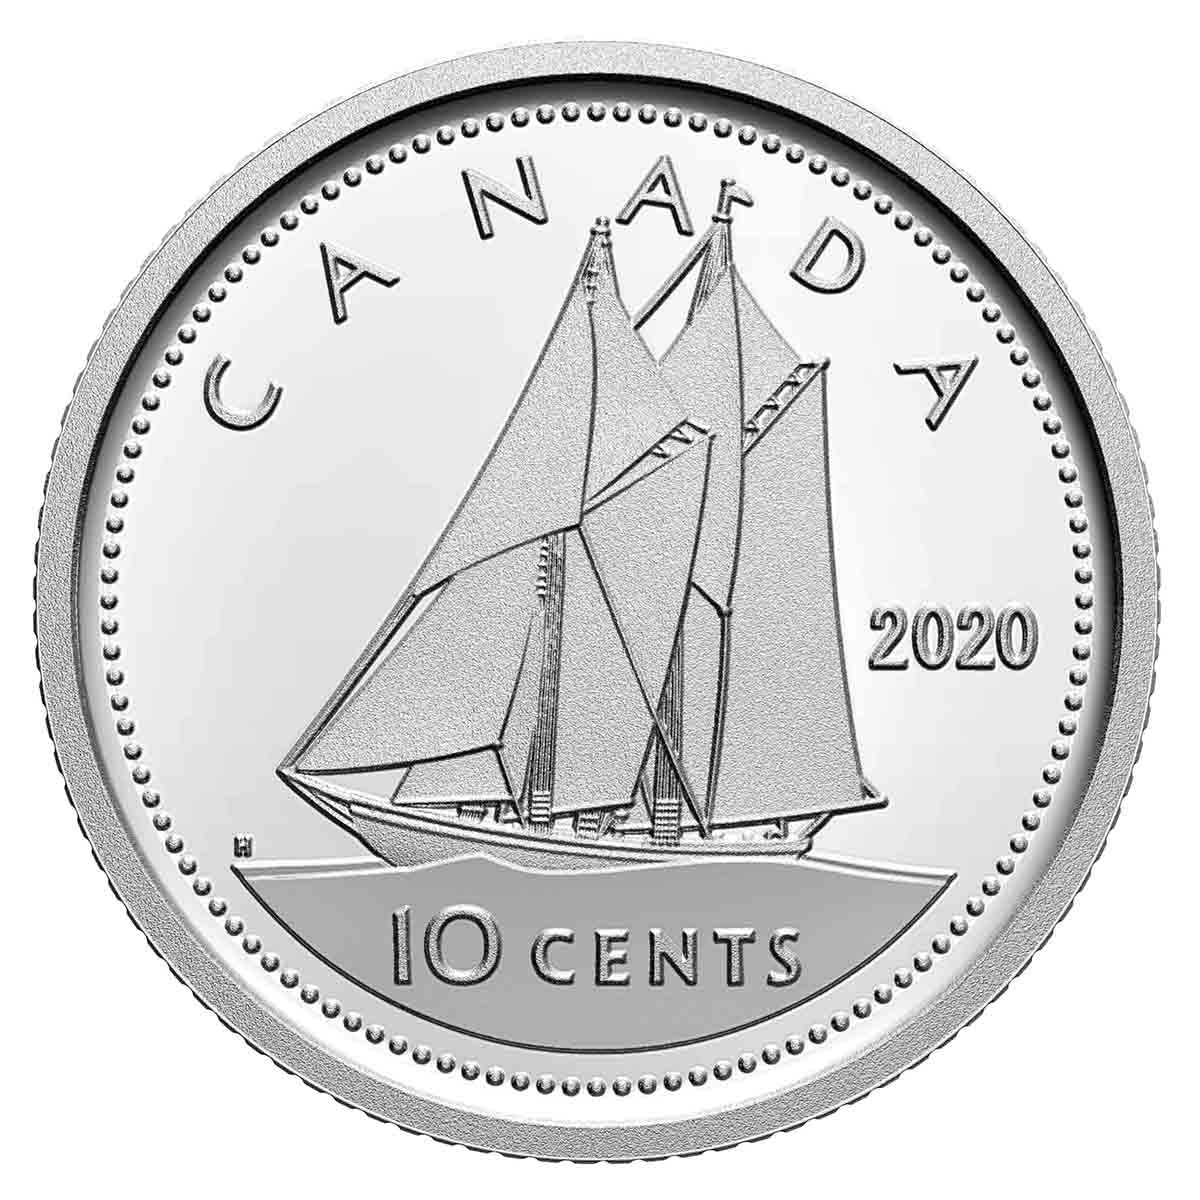 75th Anniversary of V-E Day: Royal Canadian Navy - Special Edition Silver Dollar Proof Set (2020)